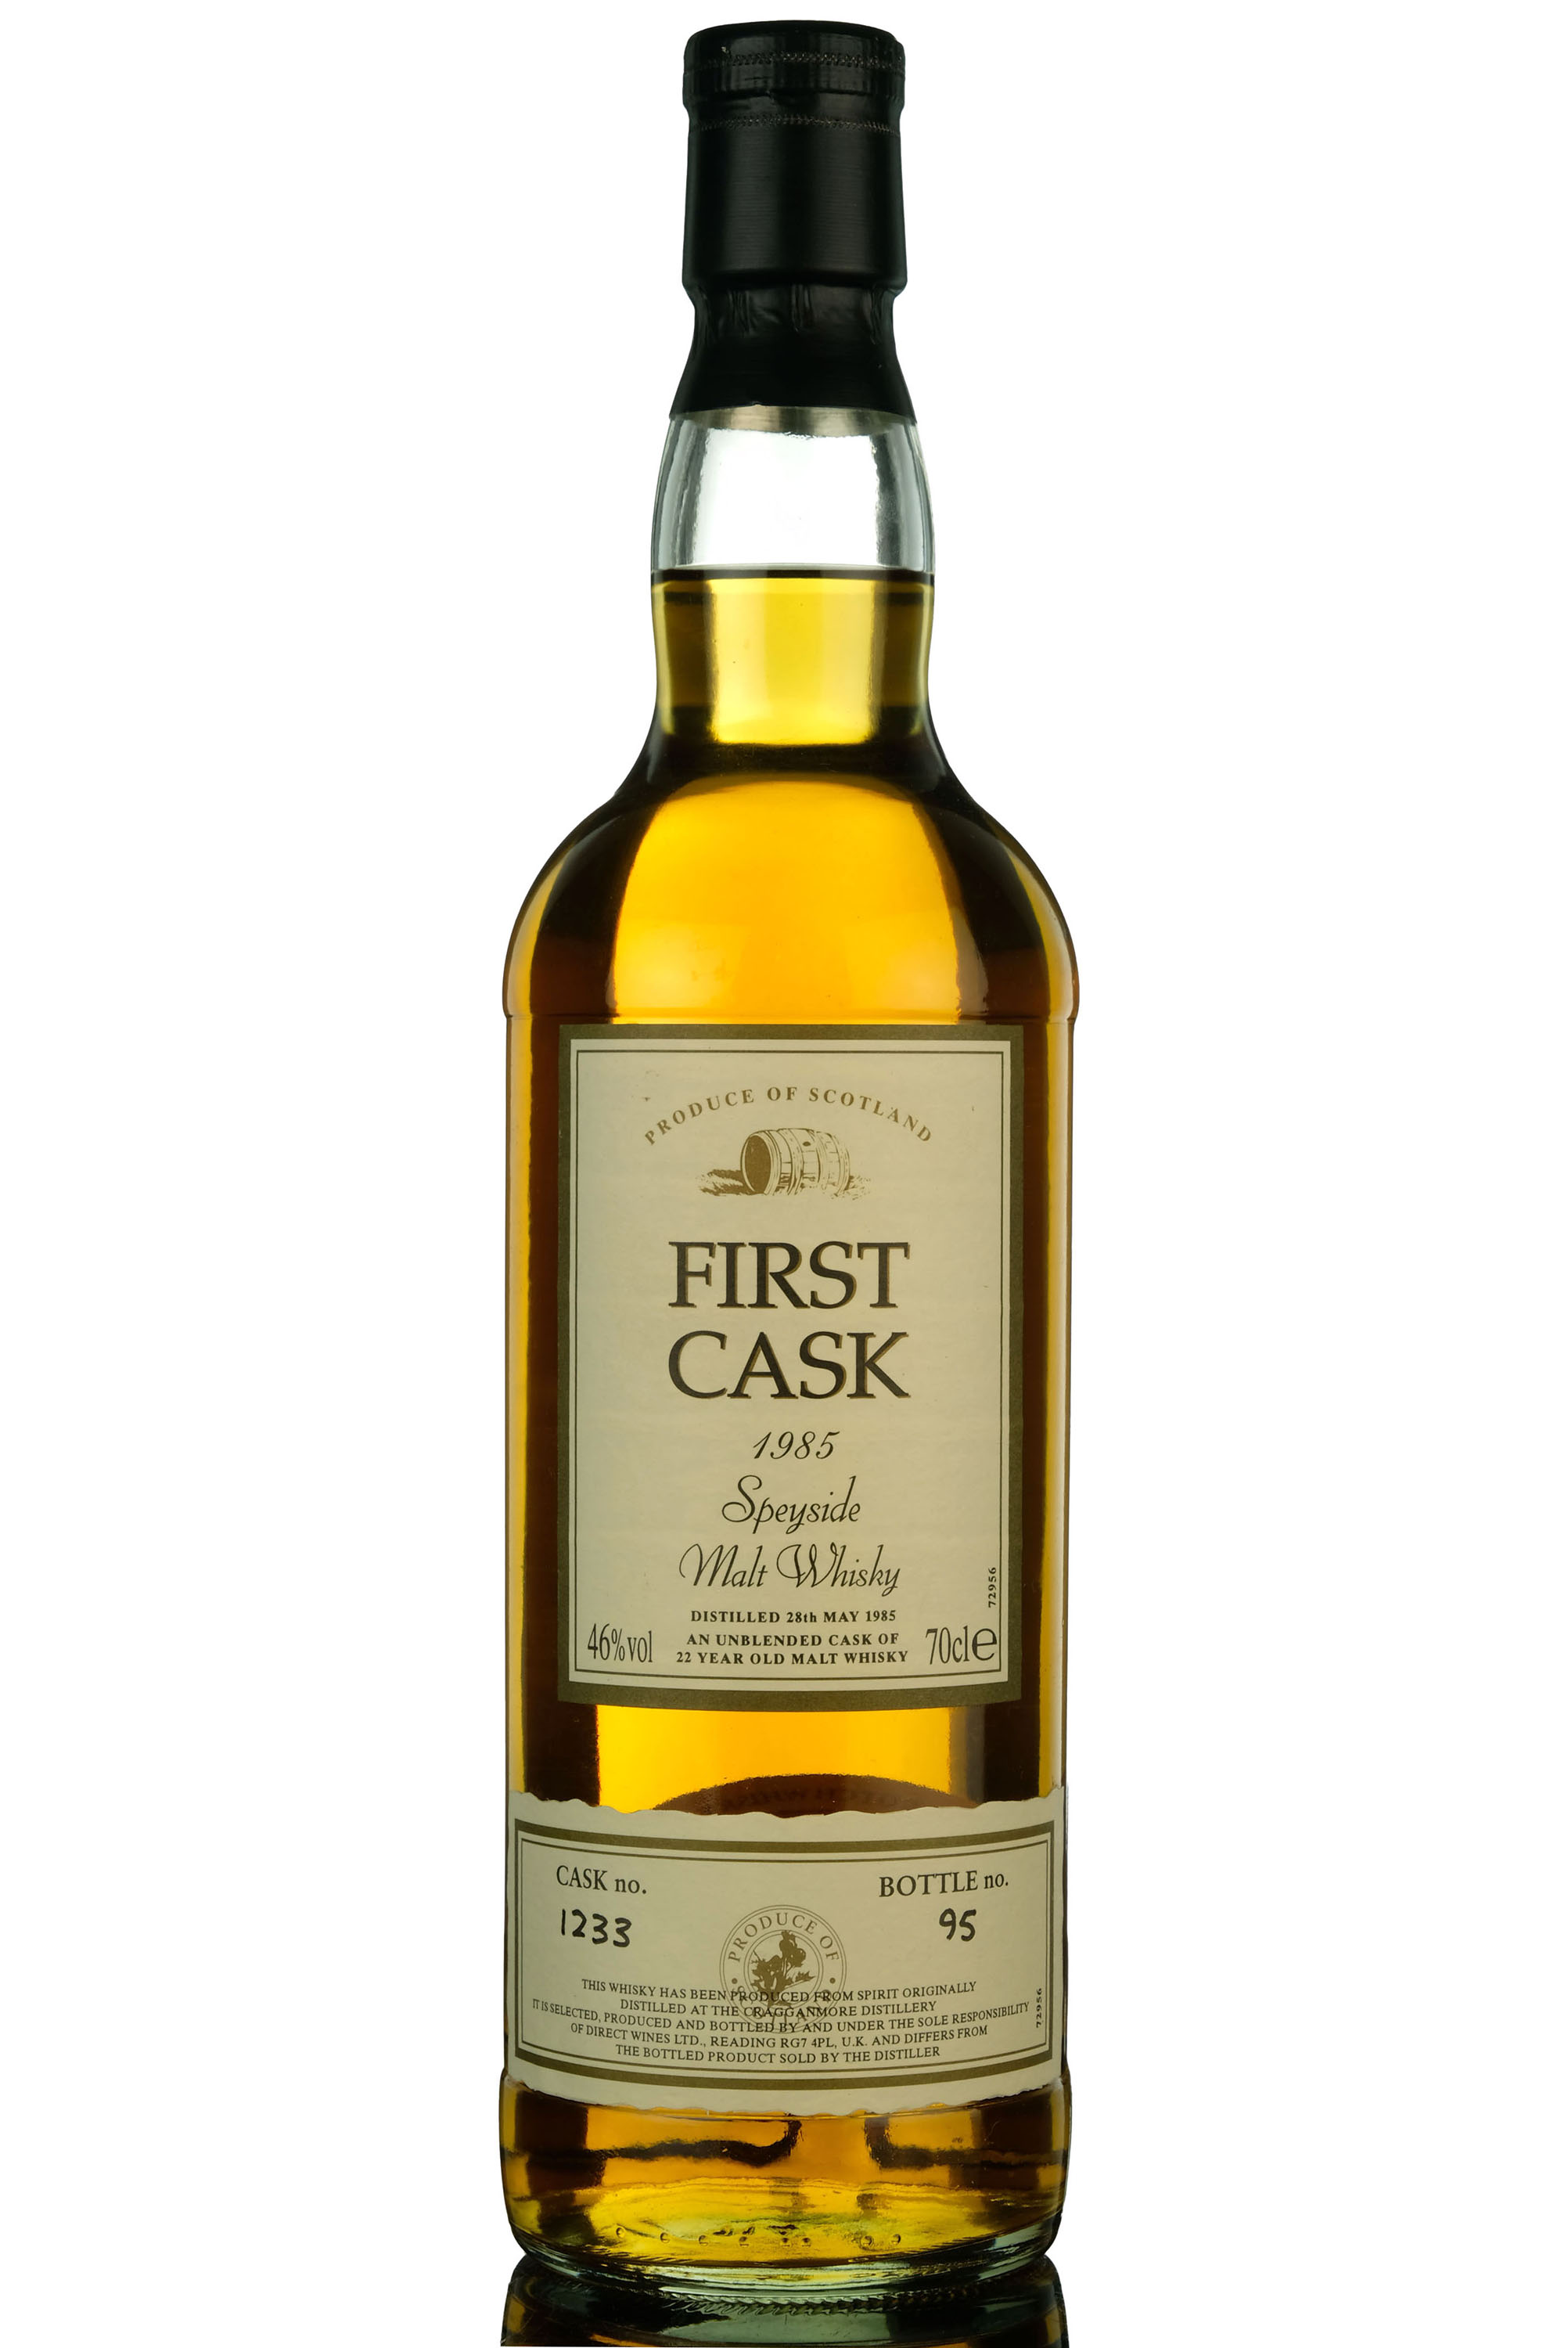 Cragganmore 1985 - 22 Year Old - First Cask - Single Cask 1233